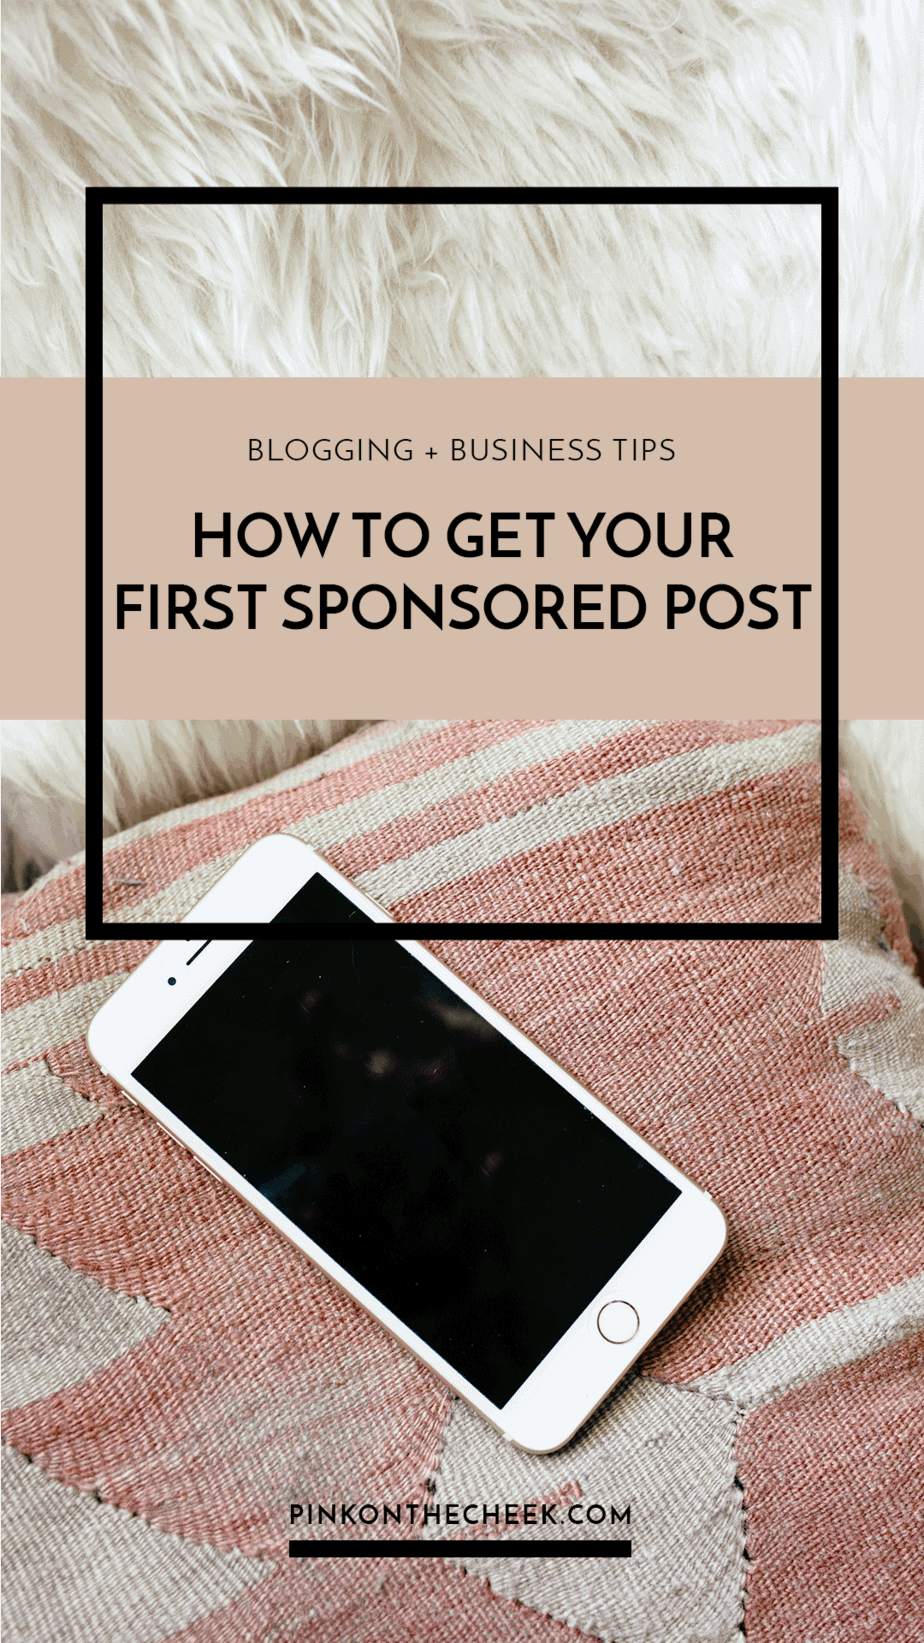 How to get your first sponsored post